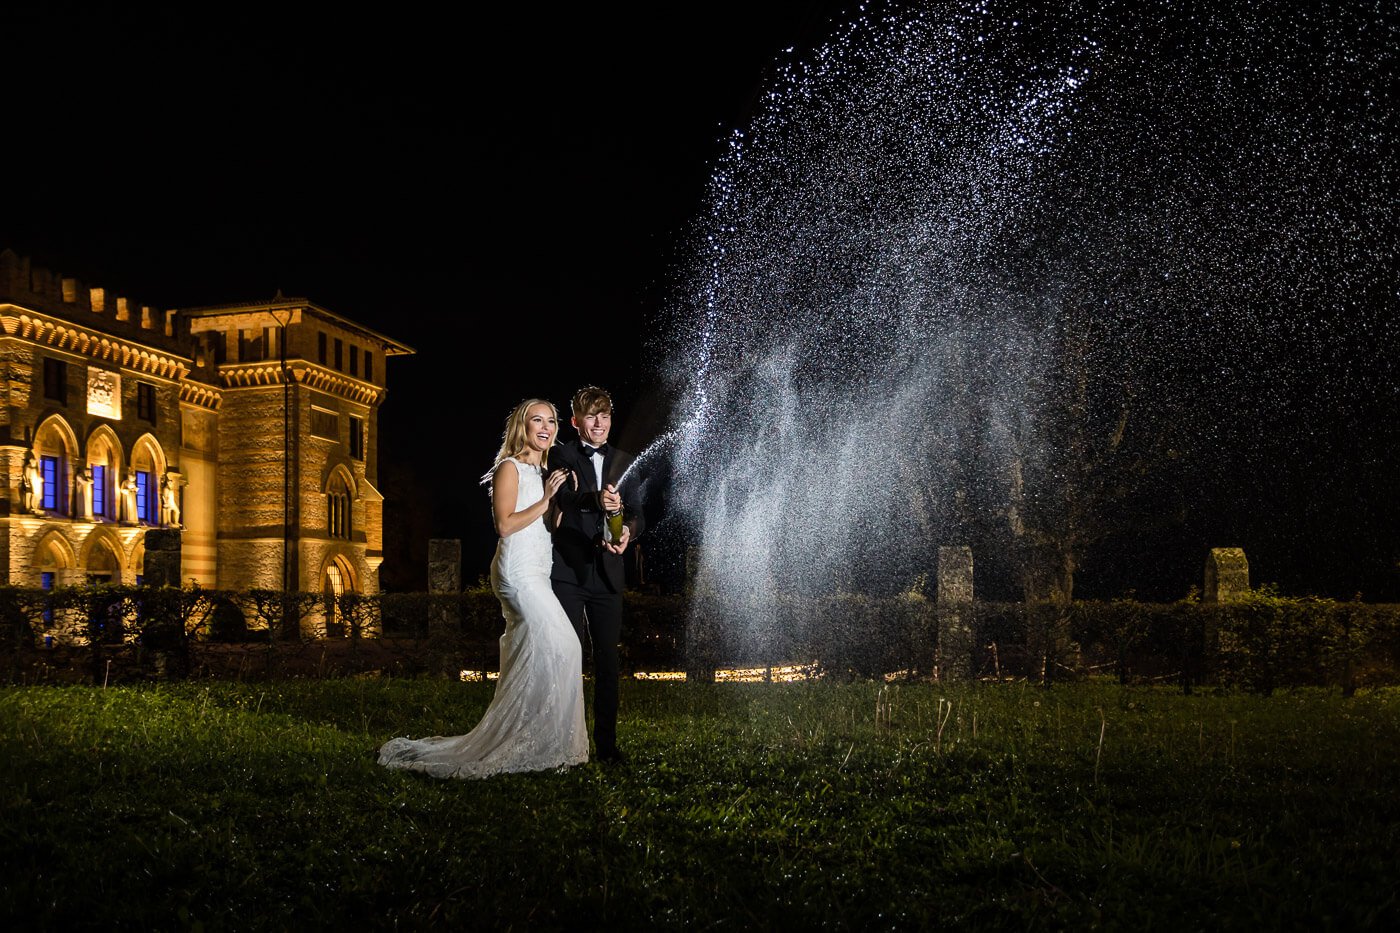 Bridal couple at night in front of wedding location with spraying champagne bottle.